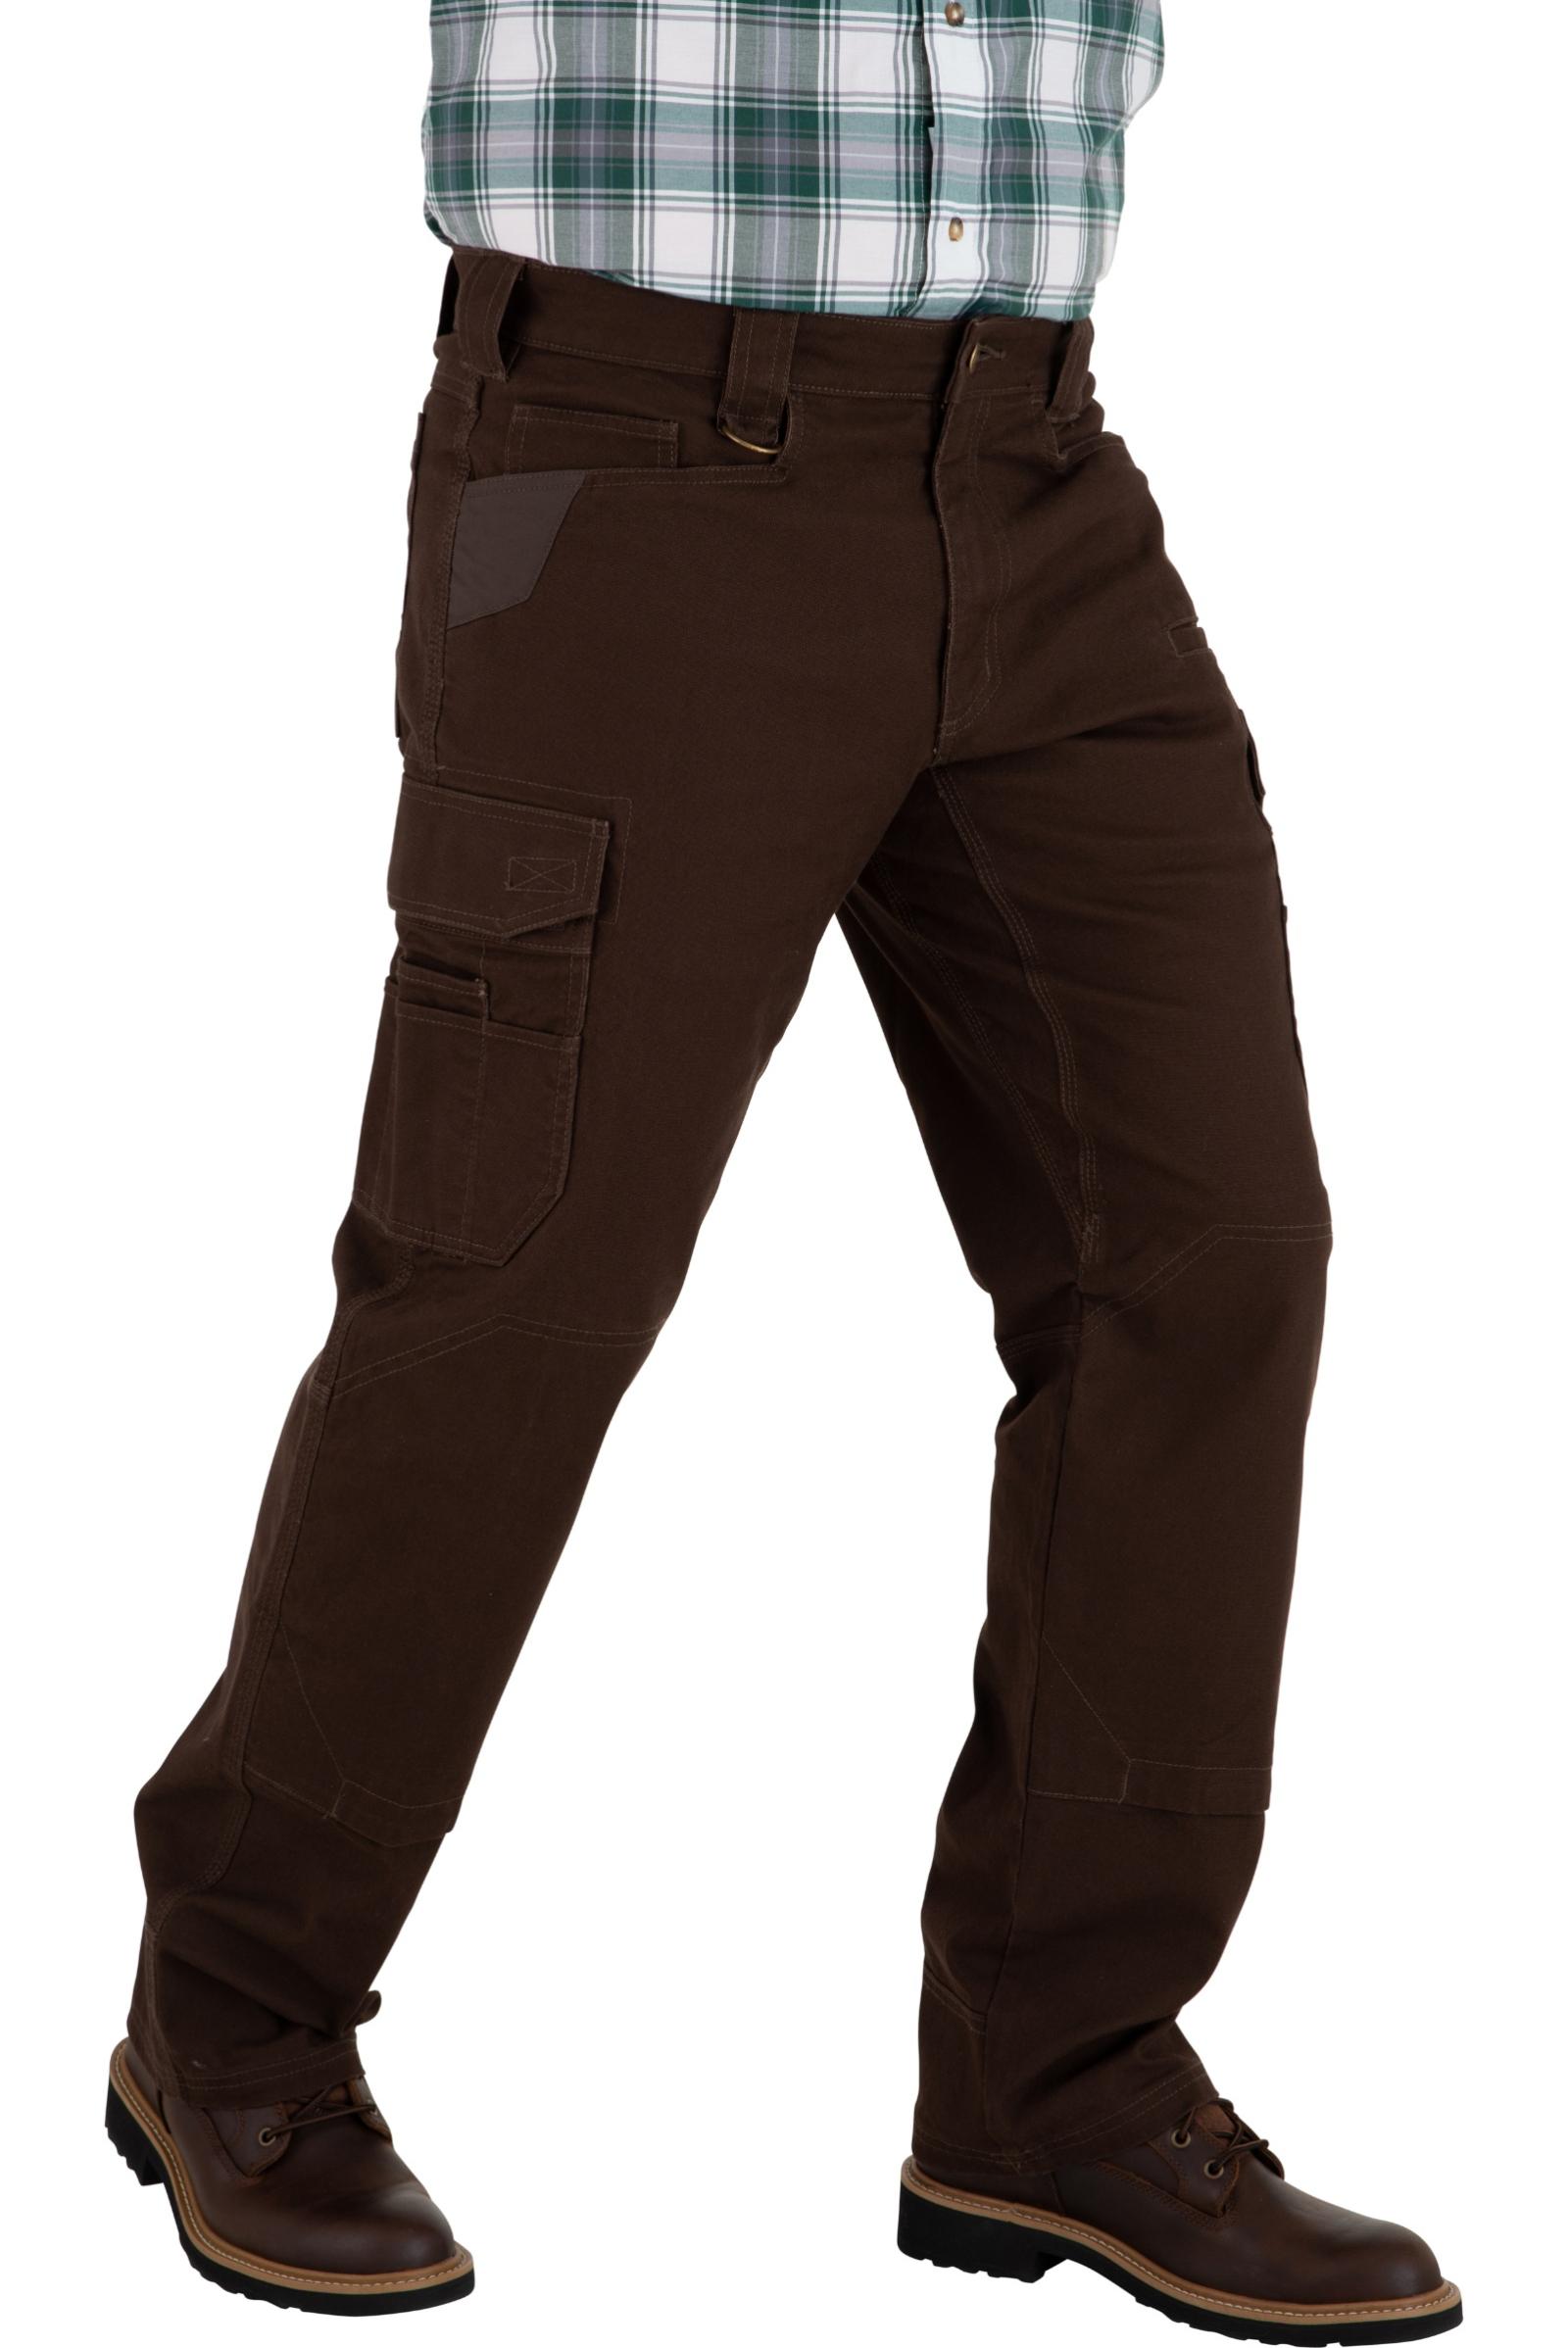 Noble Outfitters Men's FullFlexx HD Hammer Drill Cargo Canvas Pants